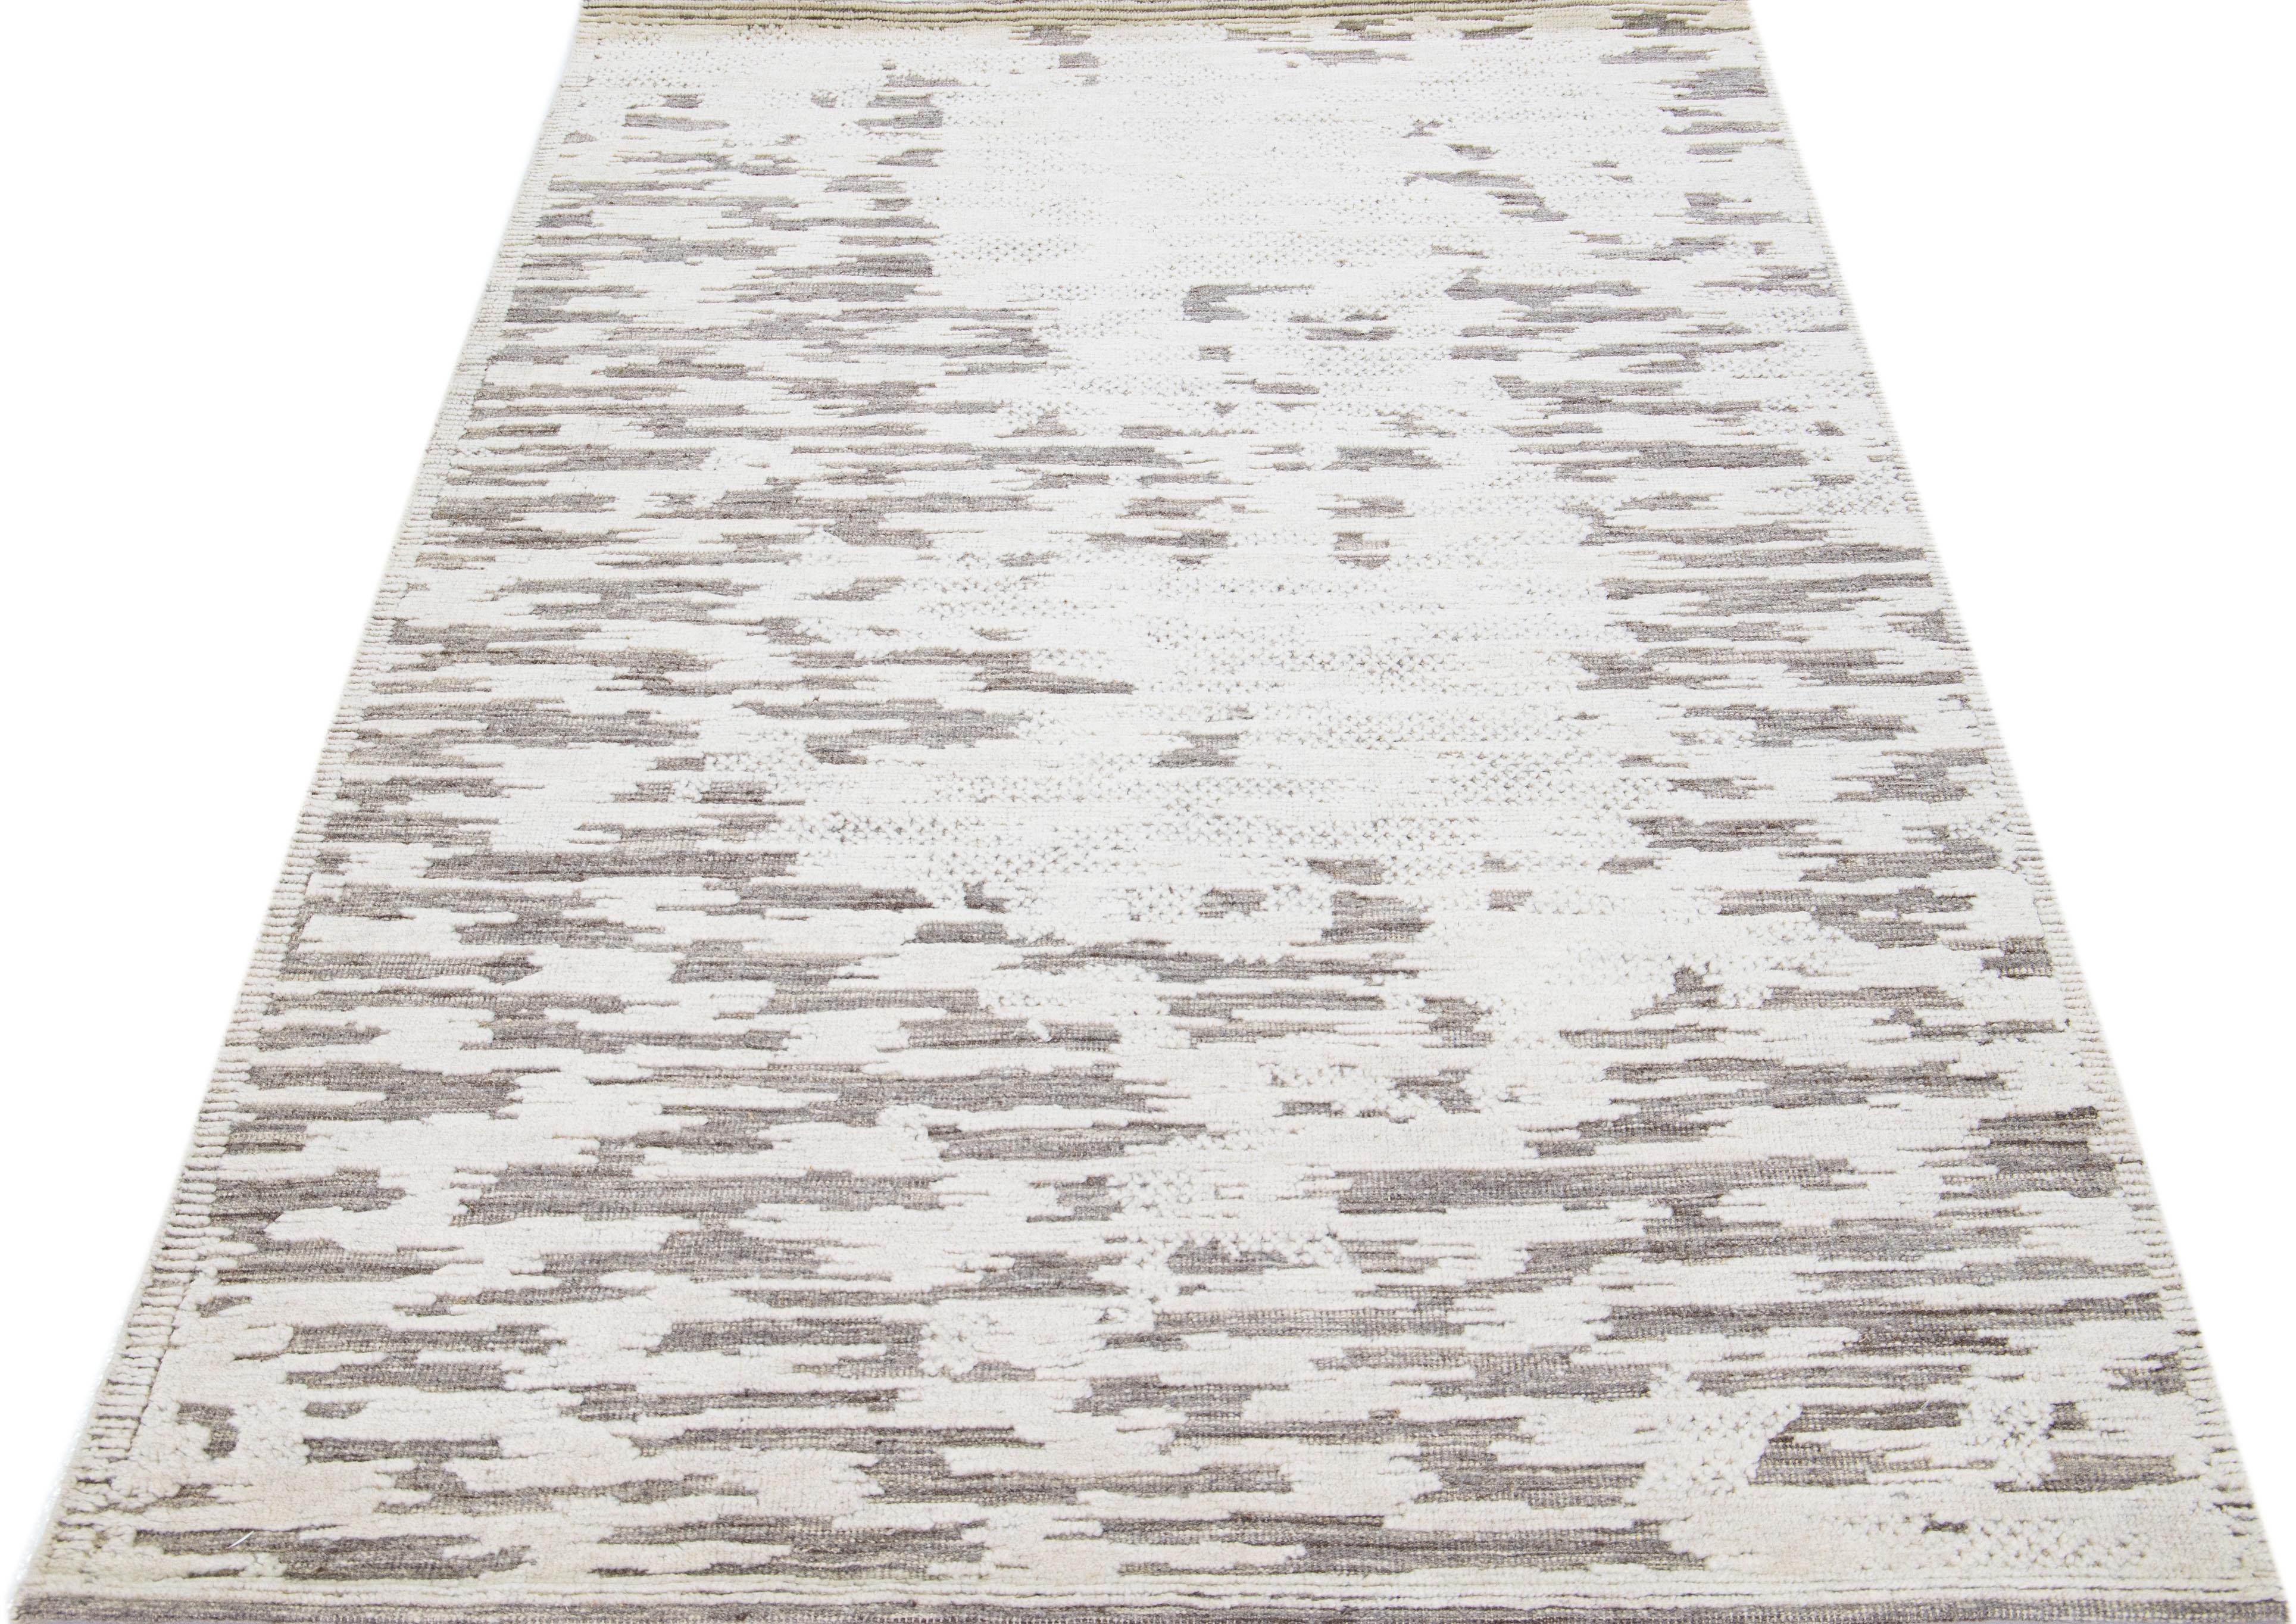 Beautiful modern Moroccan-style hand-knotted wool rug with a beige and ivory color field. This rug is part of our Apadana's Safi Collection and features an abstract design in gray.

This rug measures: 5'2